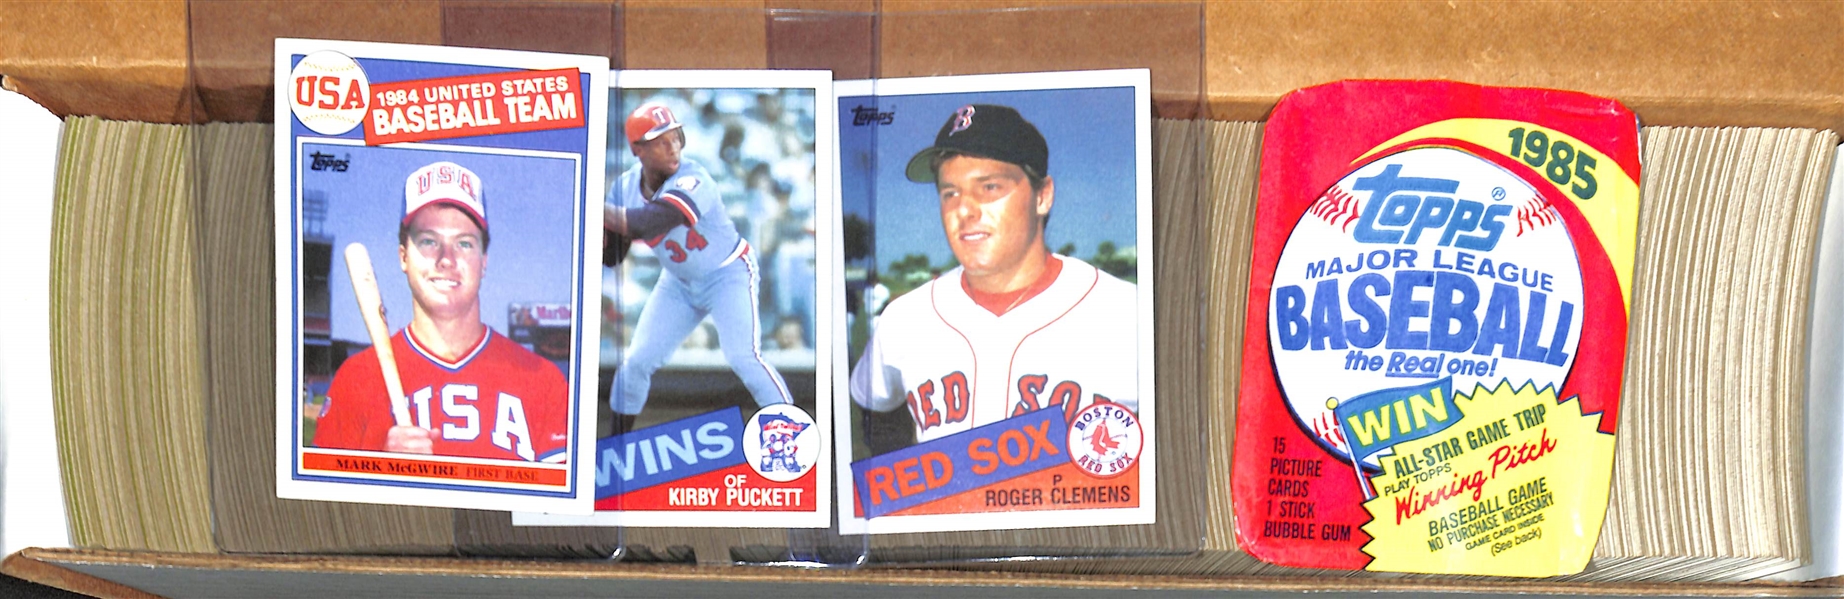 1985 Topps Baseball Complete Set w. Roger Clemens & Mark McGwire Rookie Cards